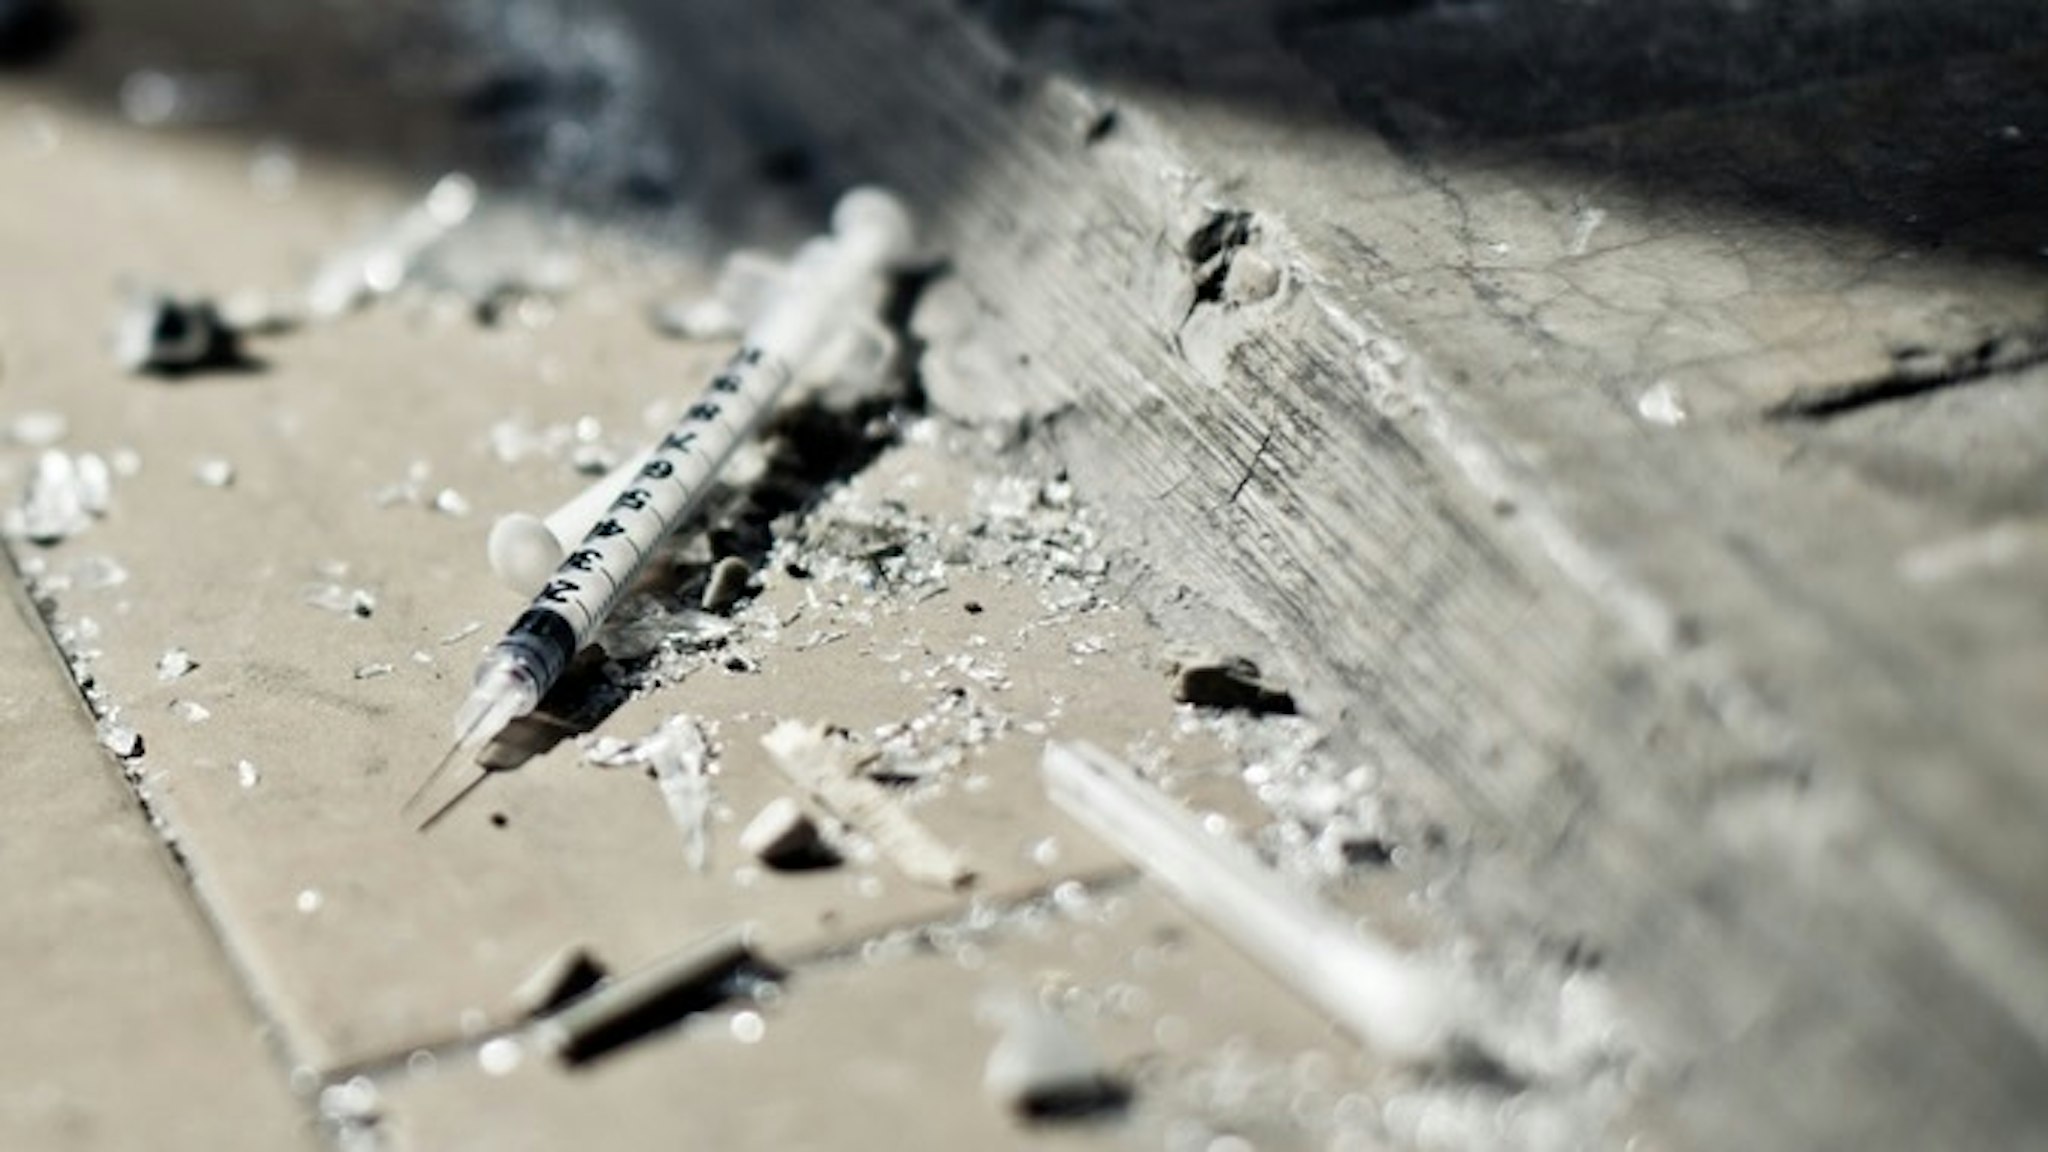 Drugs Addiction equipment - stock photo Injection on the floor - selective focus sanjeri via Getty Images